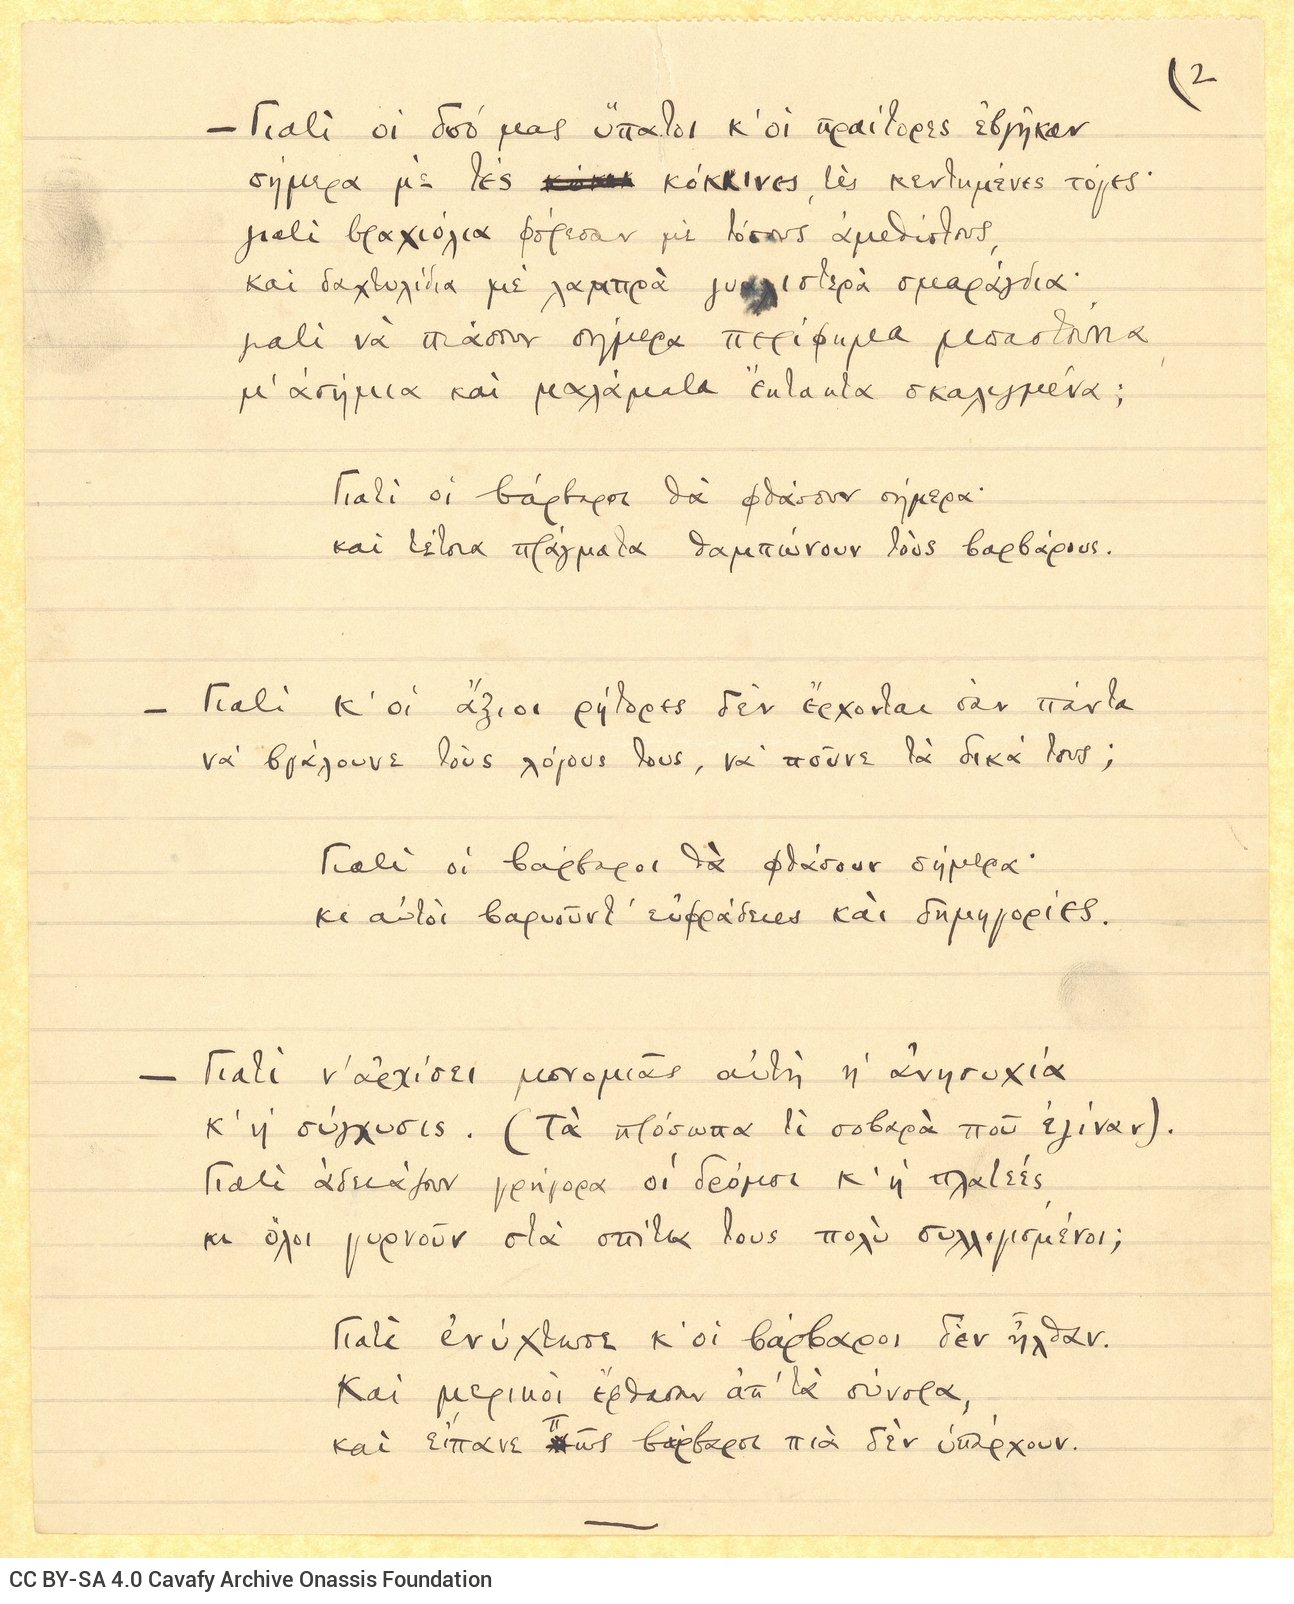 Manuscript of the poem "Waiting for the Barbarians", on one side of three ruled sheets. Page numbers indicated ("1, 2, 3")